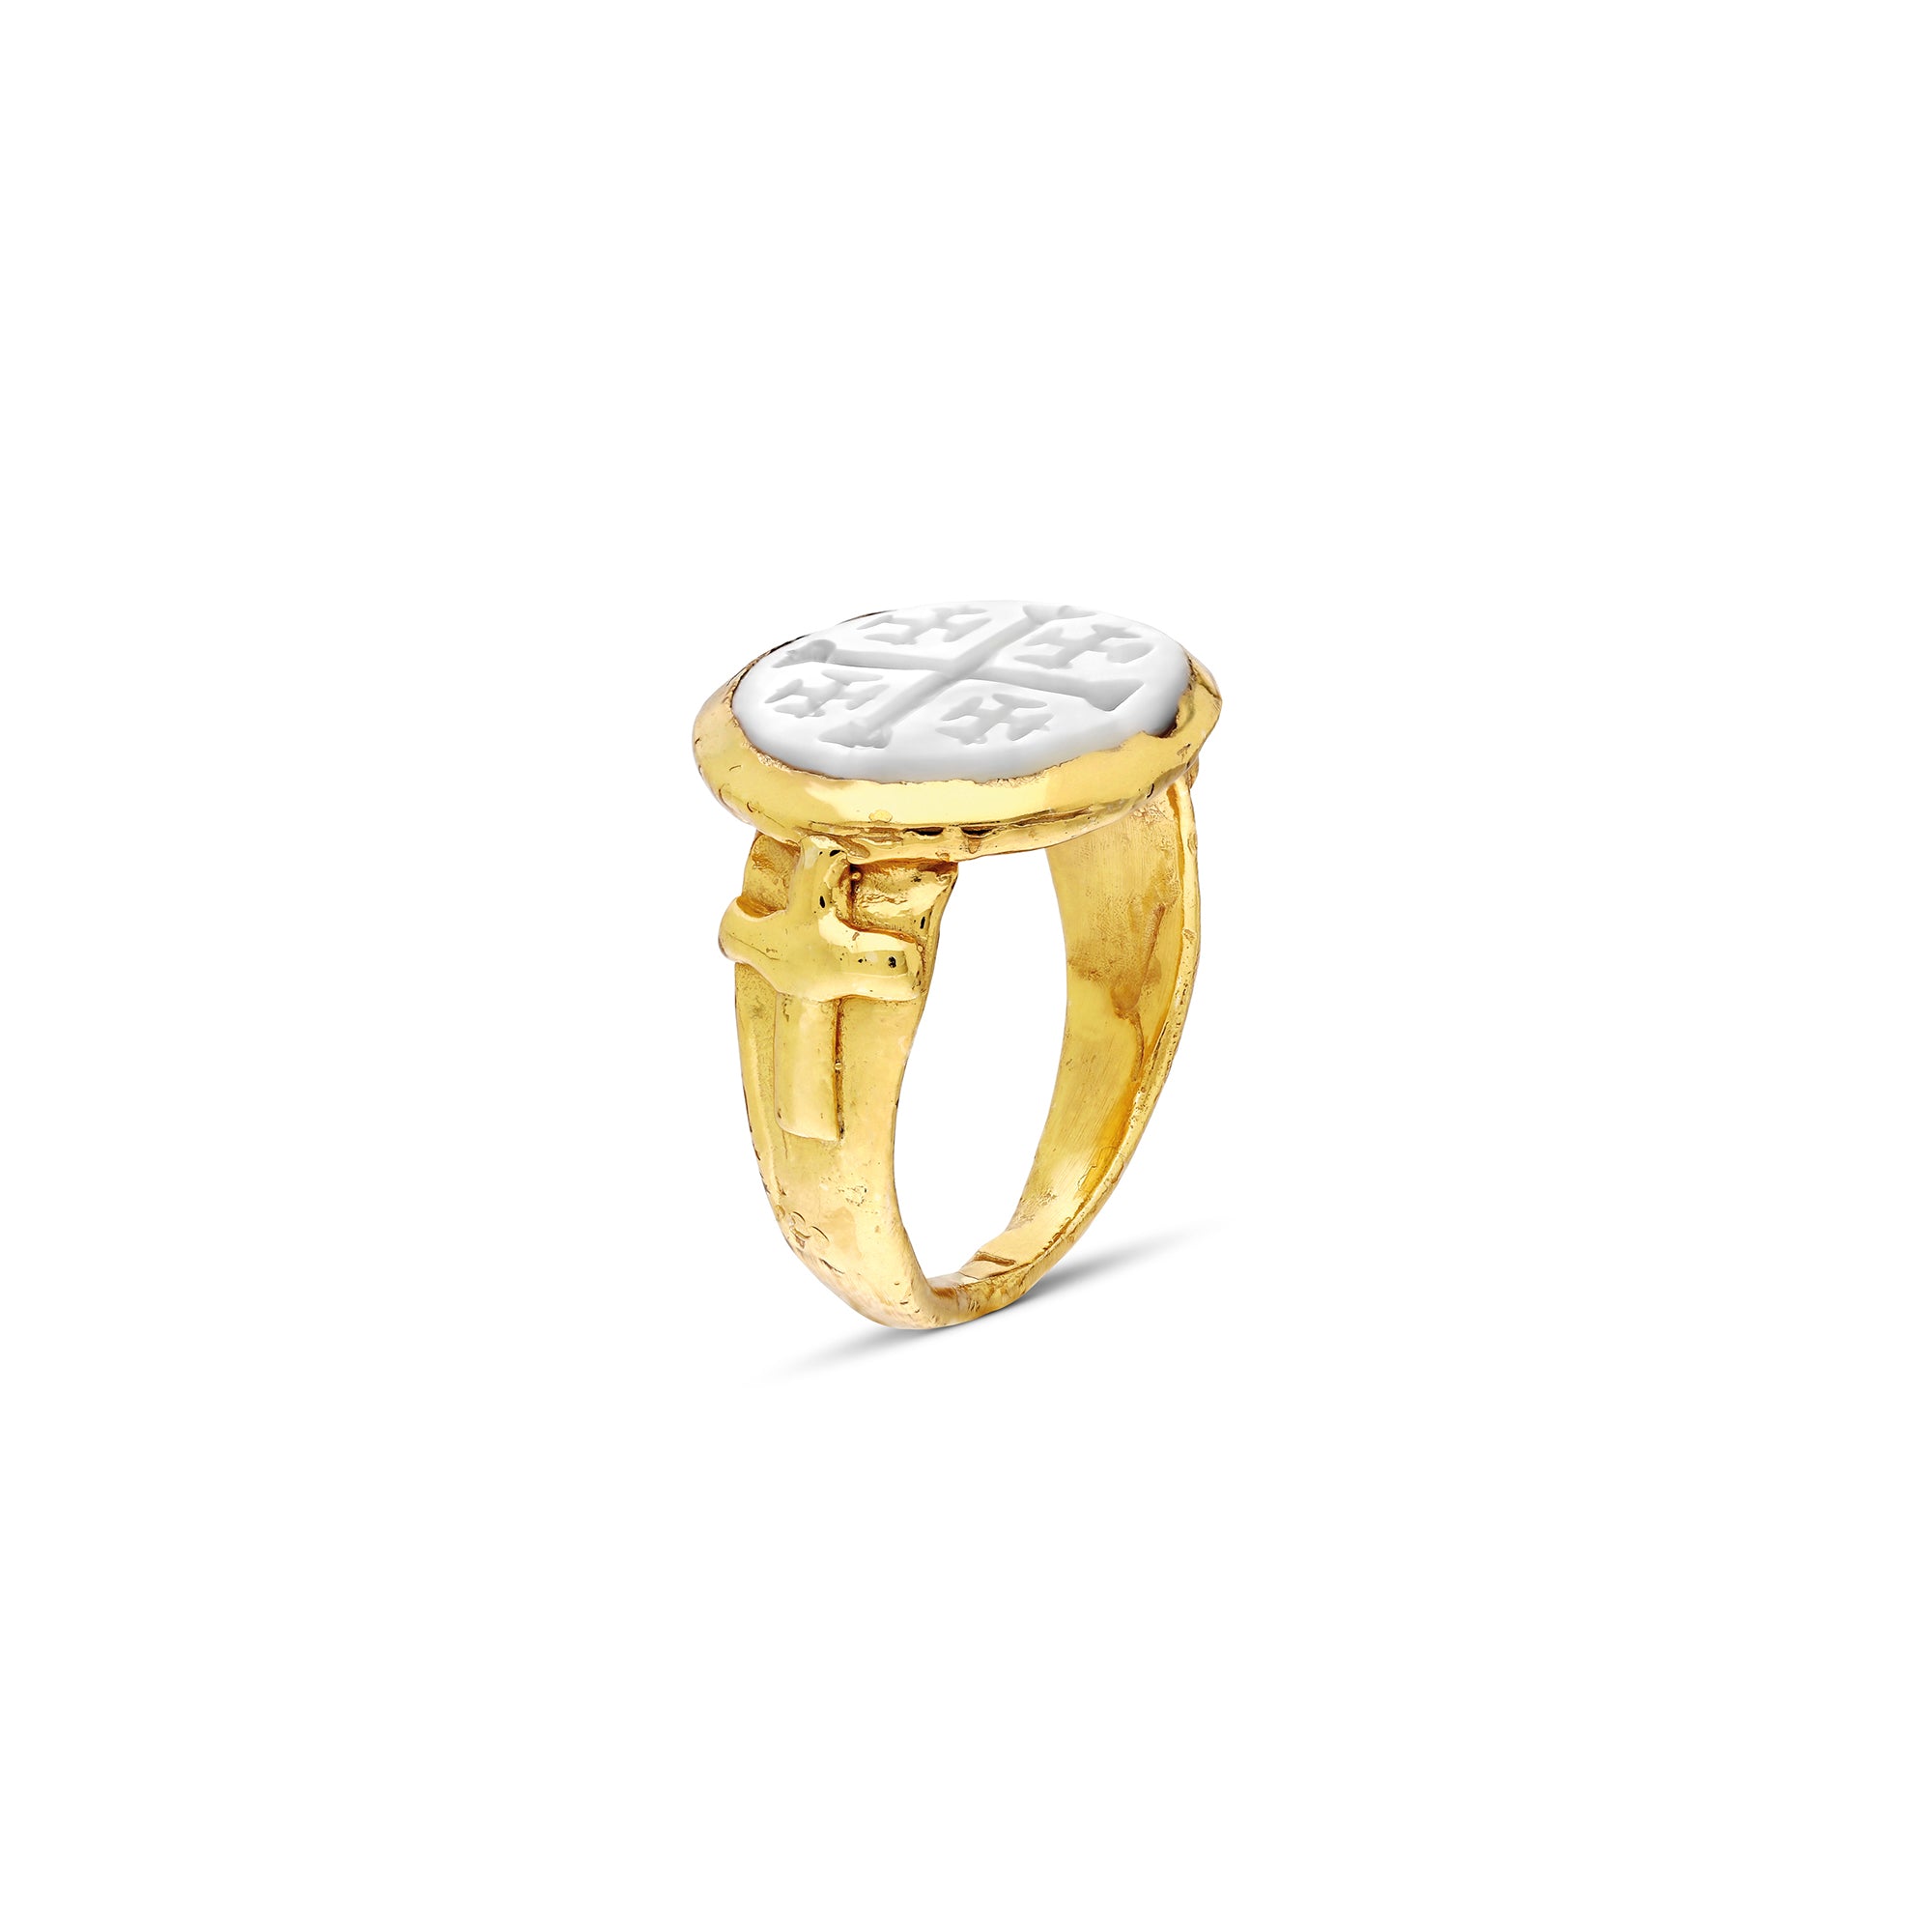 THE ALEXIOS RING